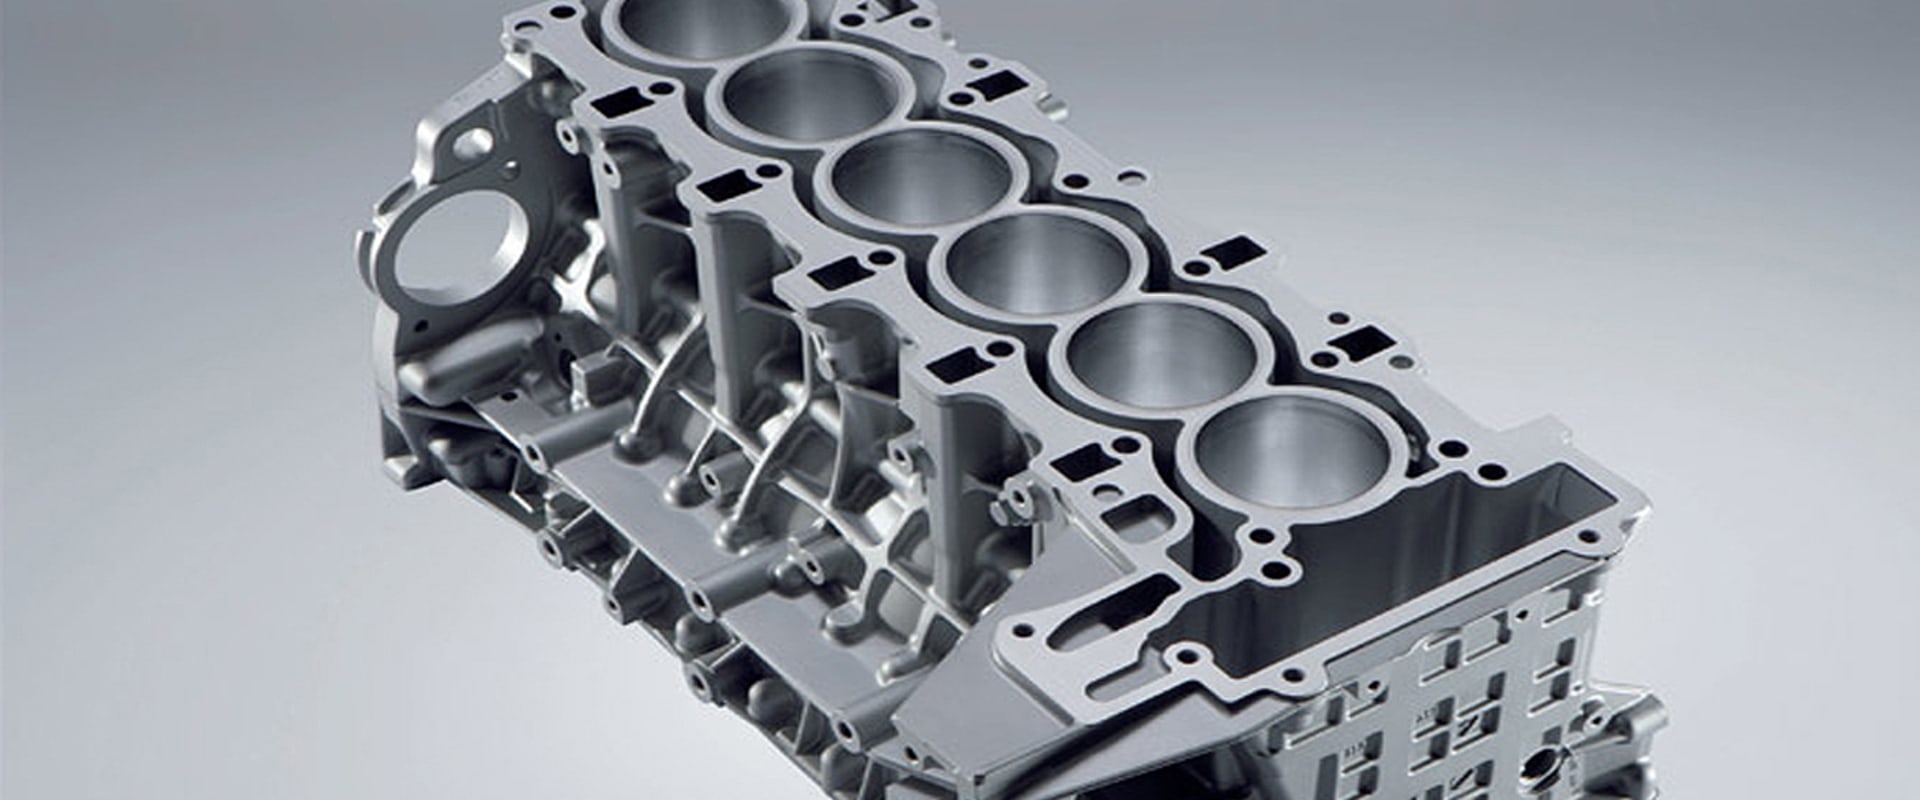 Inline-Six Engines: What You Need to Know